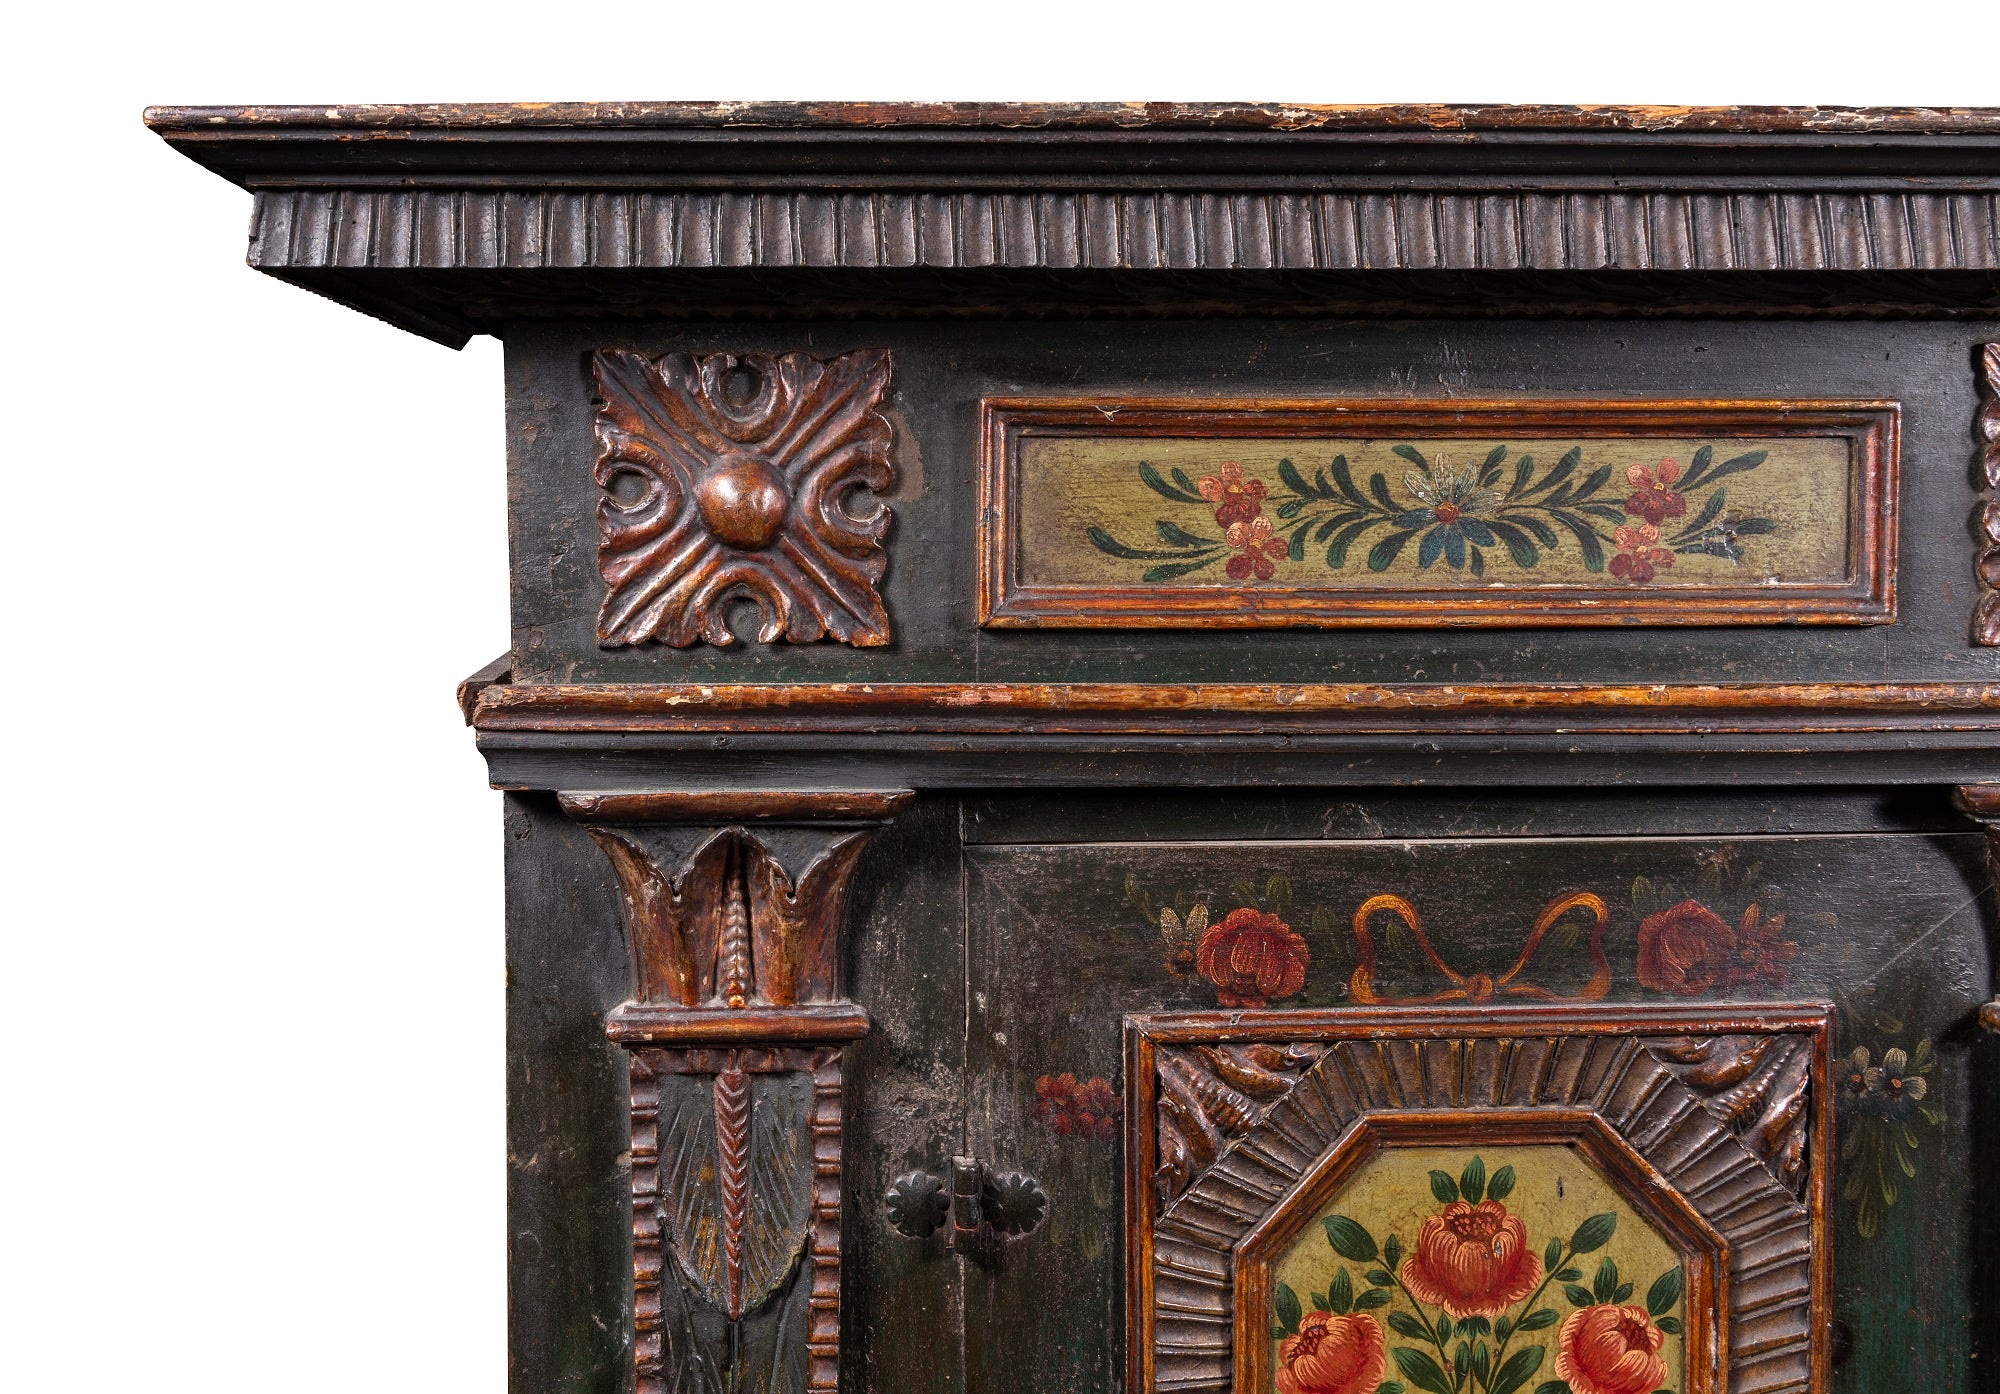 A Late 18th Early 19th Century Flemish Pained Cabinet